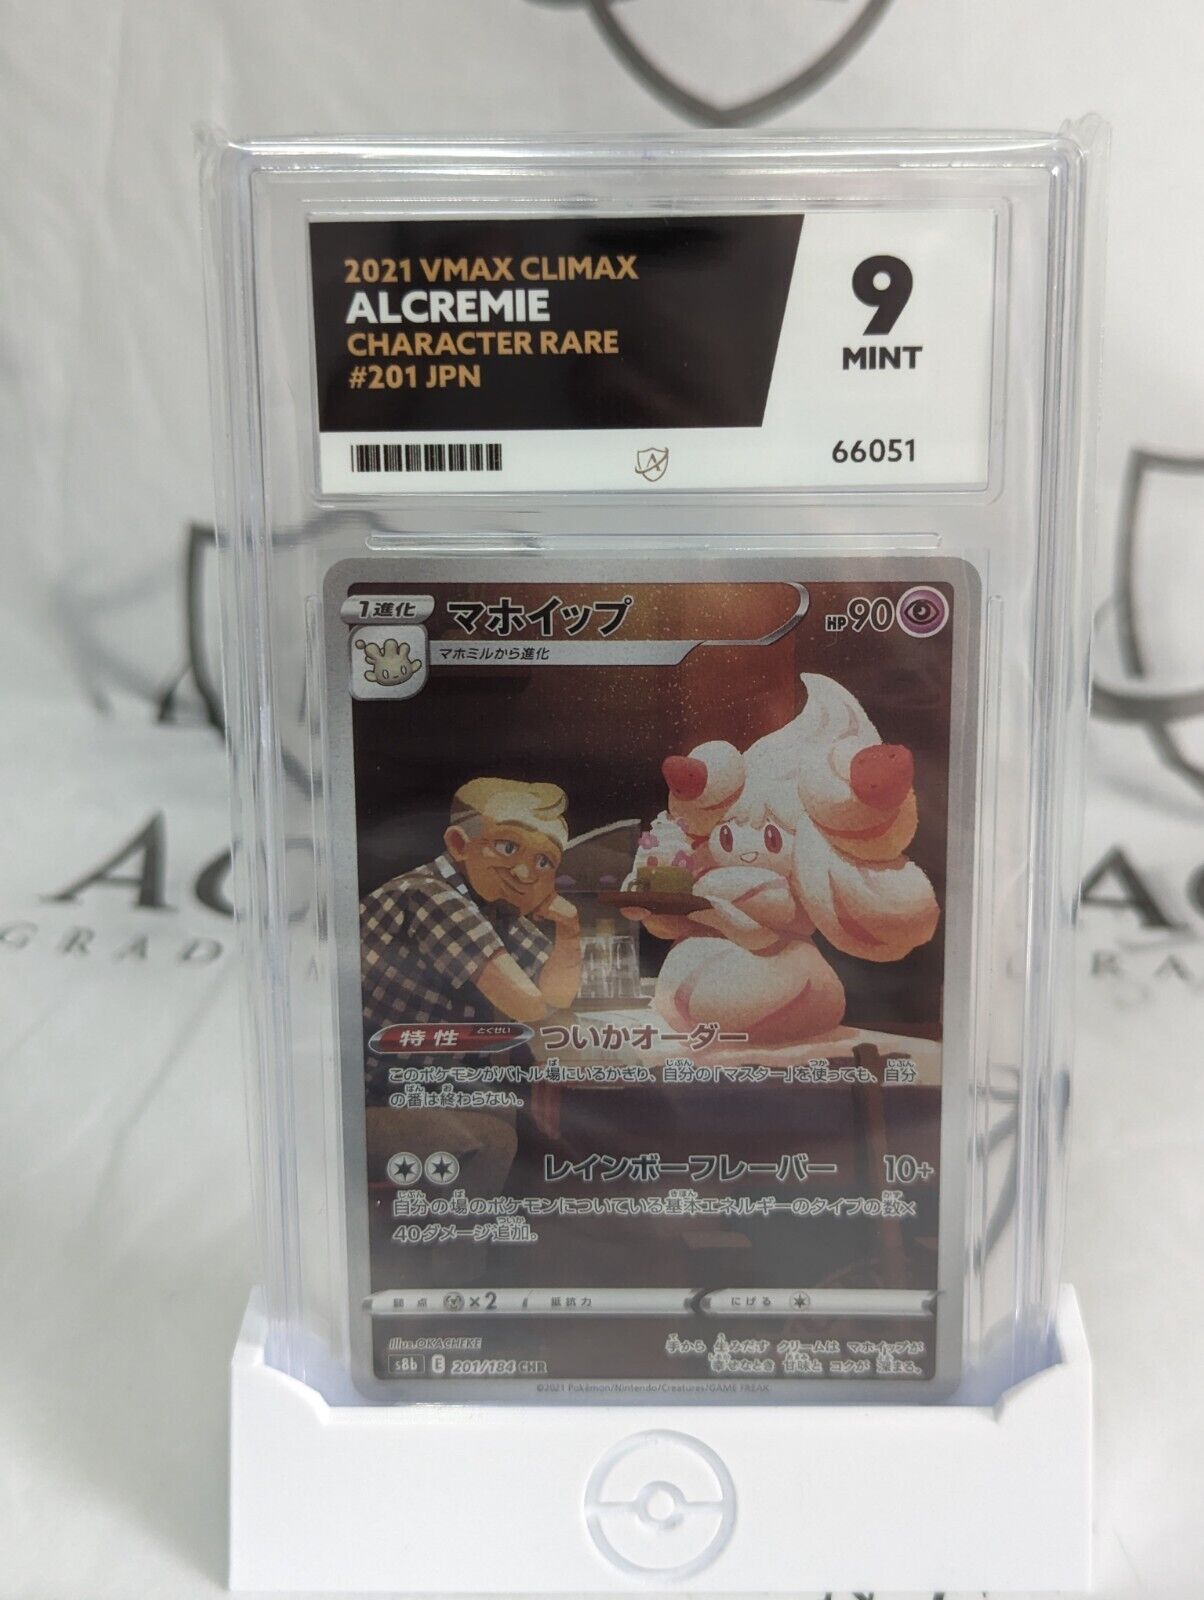 Alcremie Character Rare 201/184 2021 Vmax Climax JPN - Ace 9 Mint